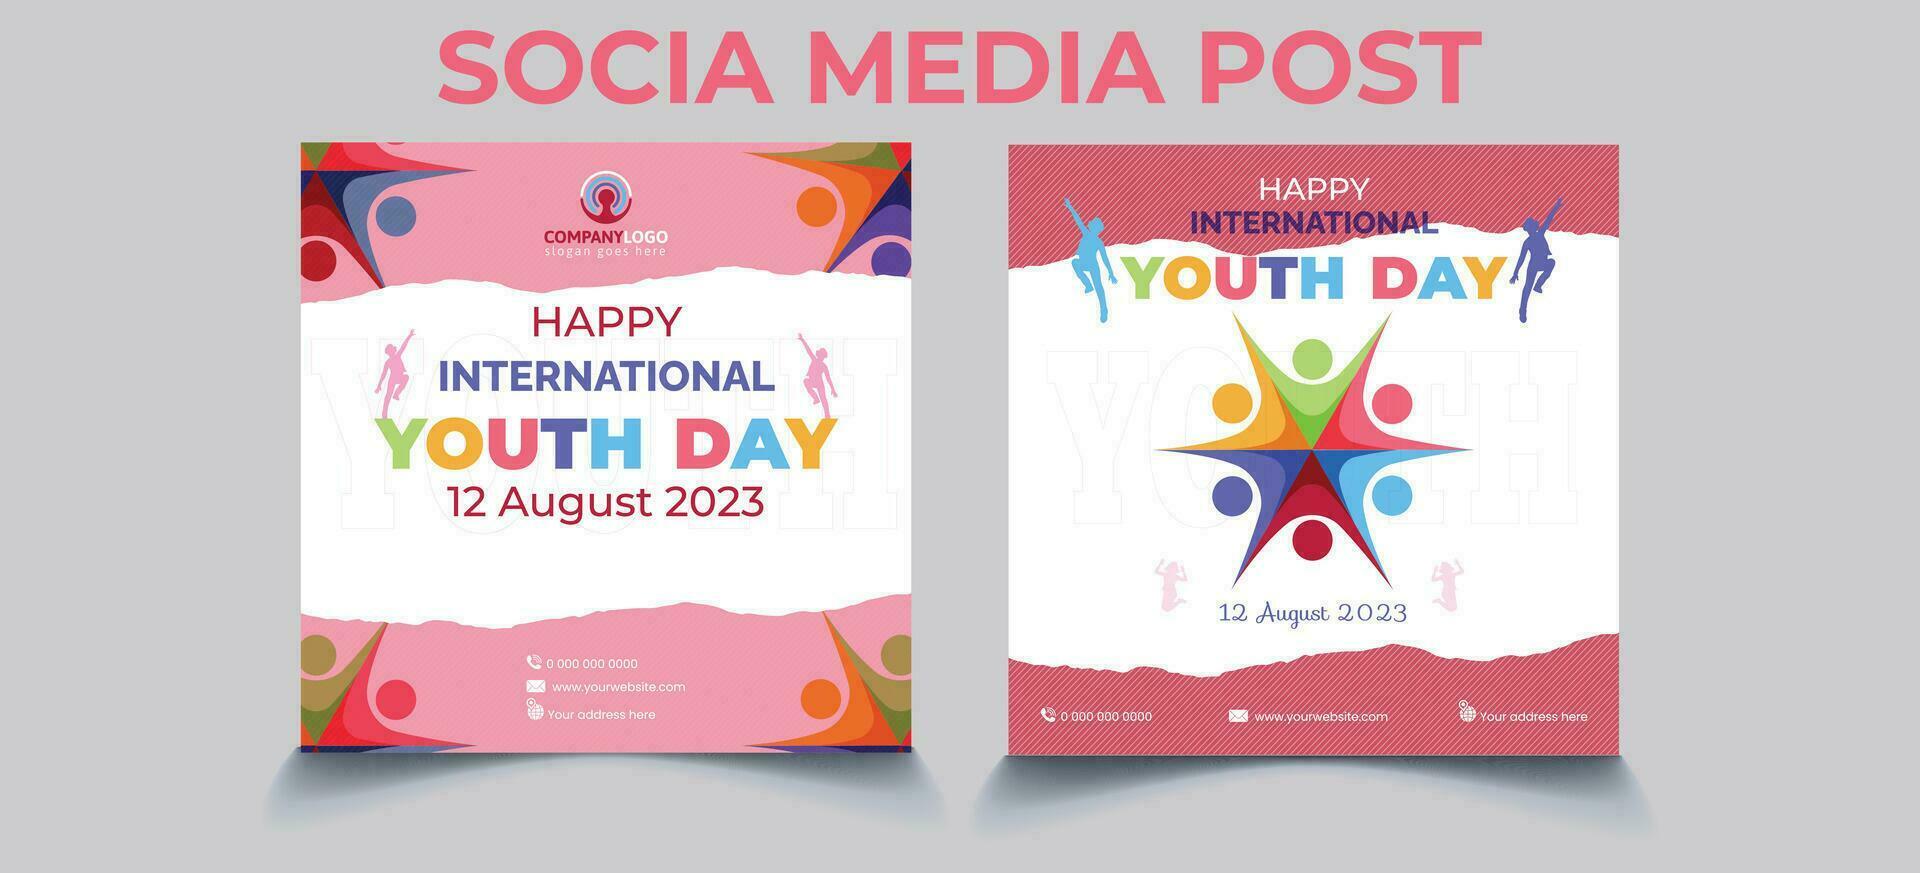 International Youth Day social media poster banner, international youth day background, Creative concept, world youth day vector